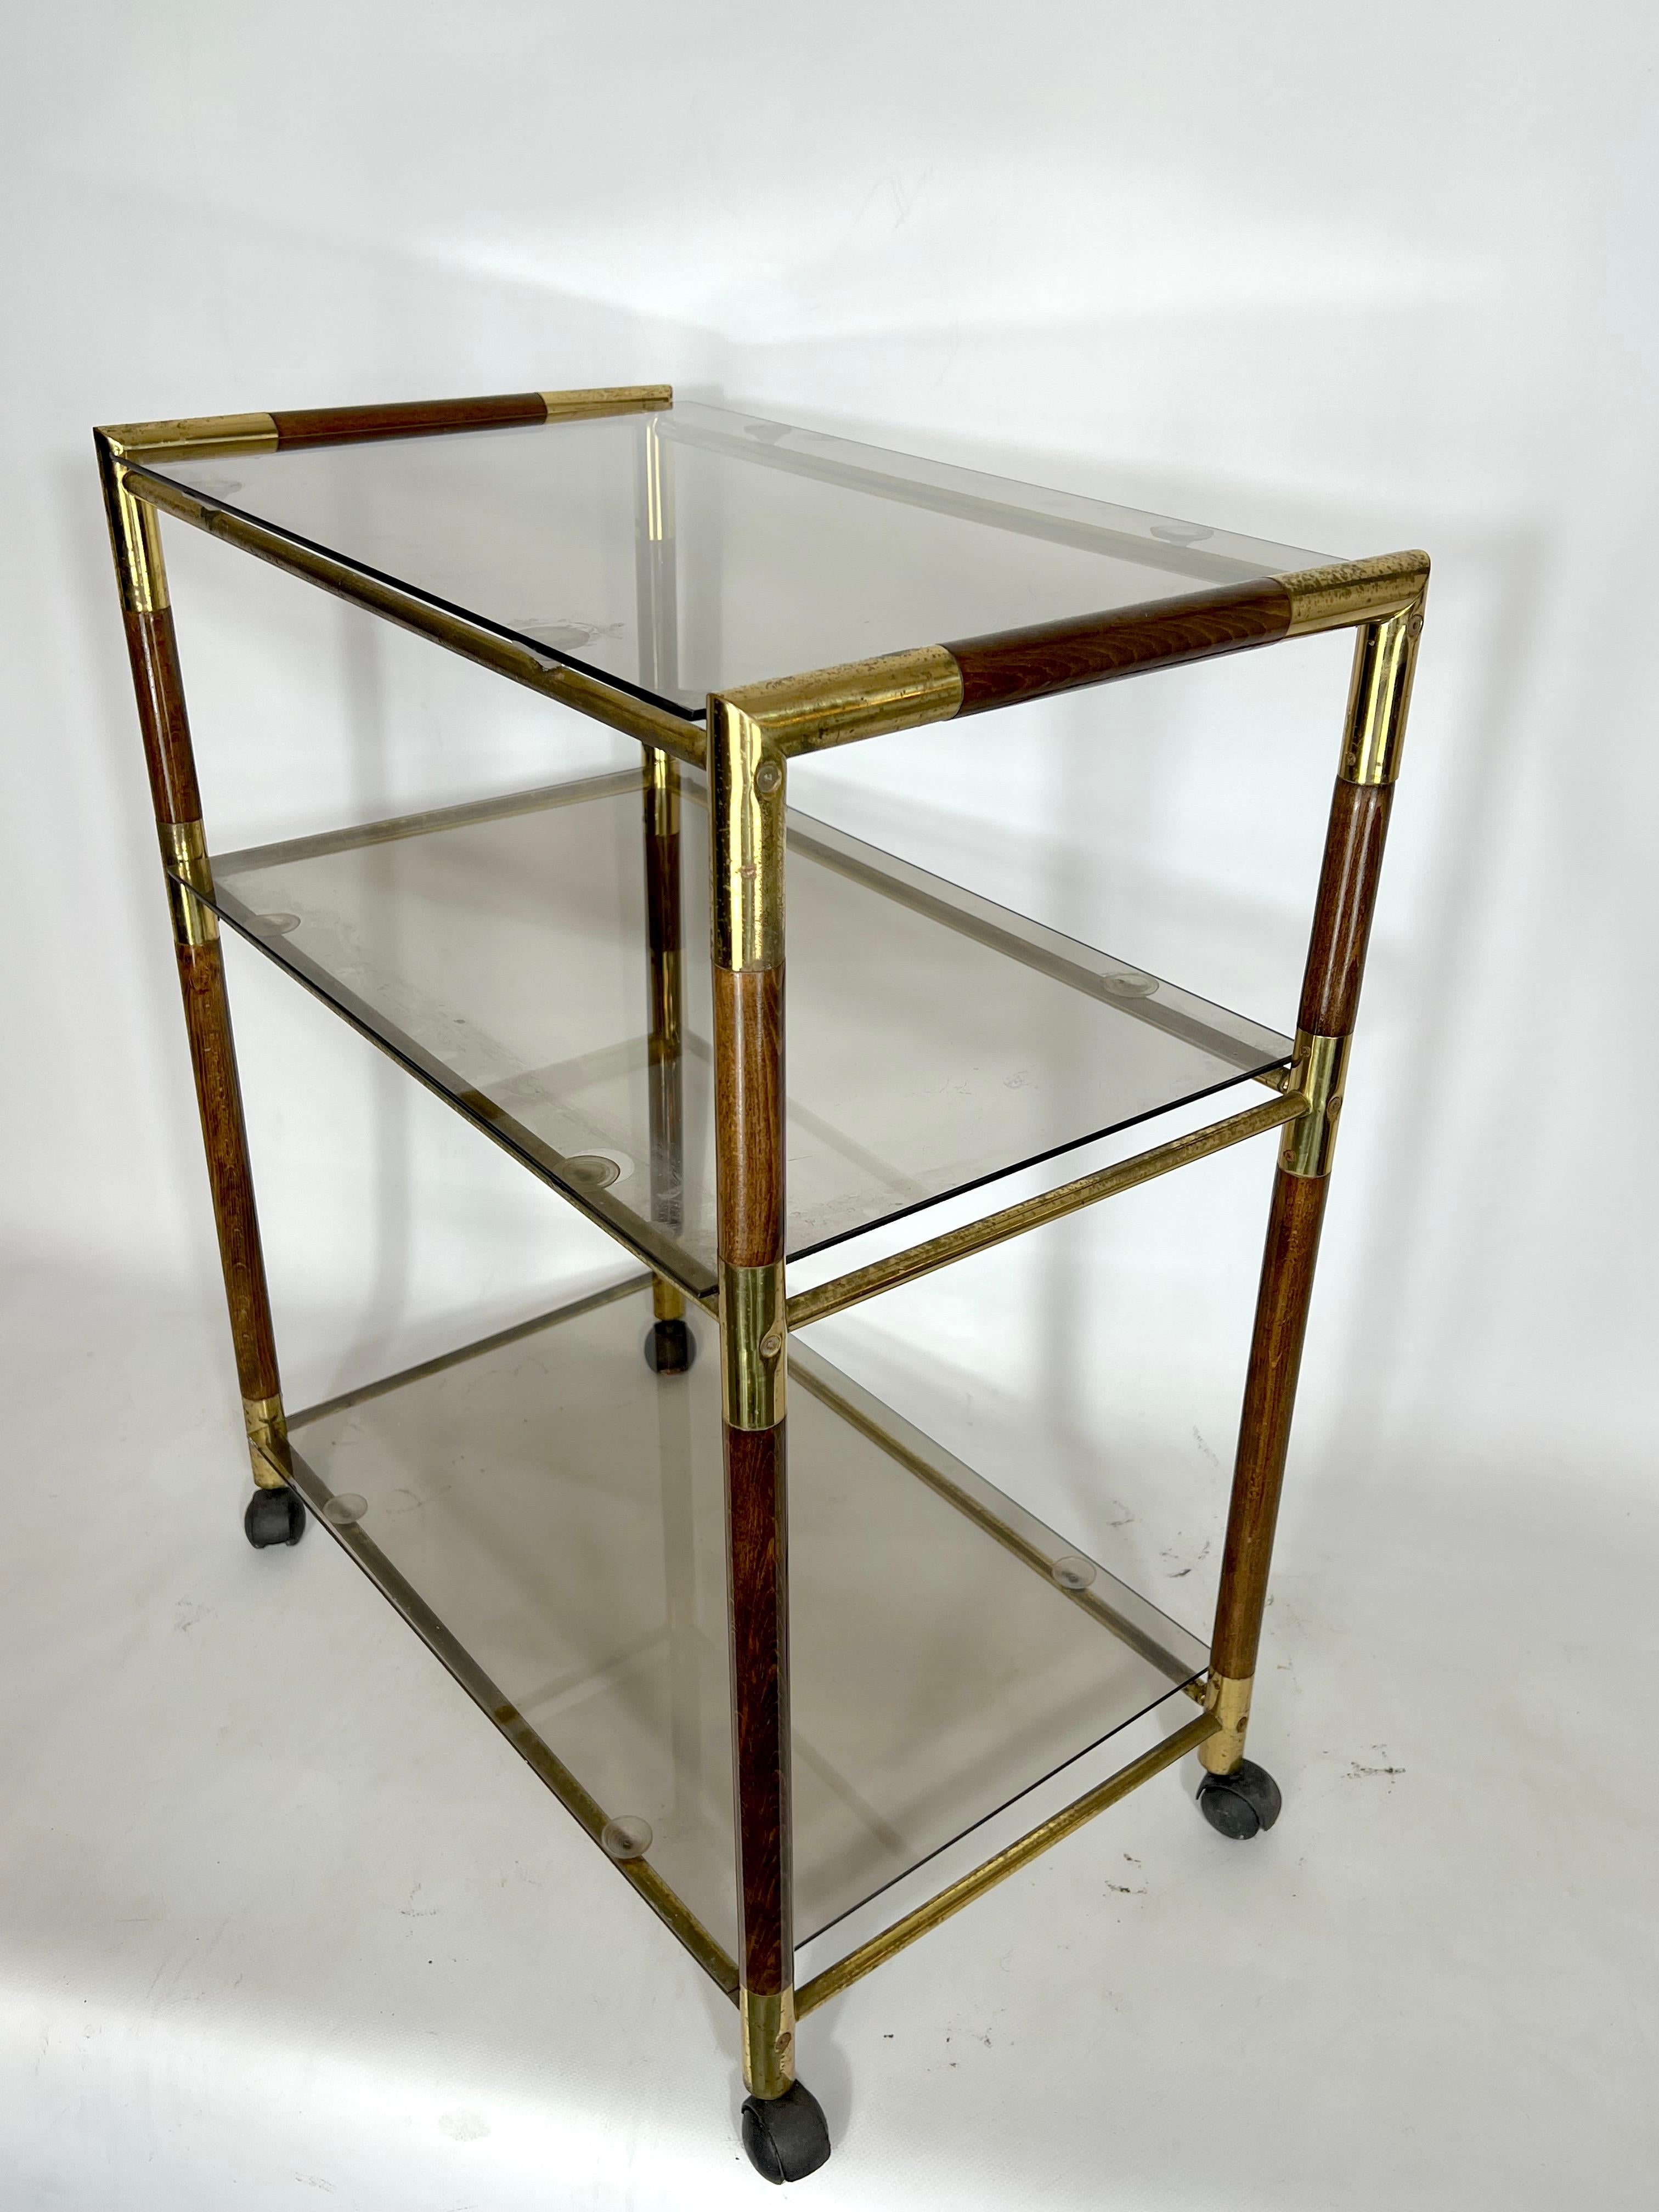 Vintage Three Shelves Brass and Wood Trolley or Bar Cart by Tommaso Barbi, 1970s For Sale 2